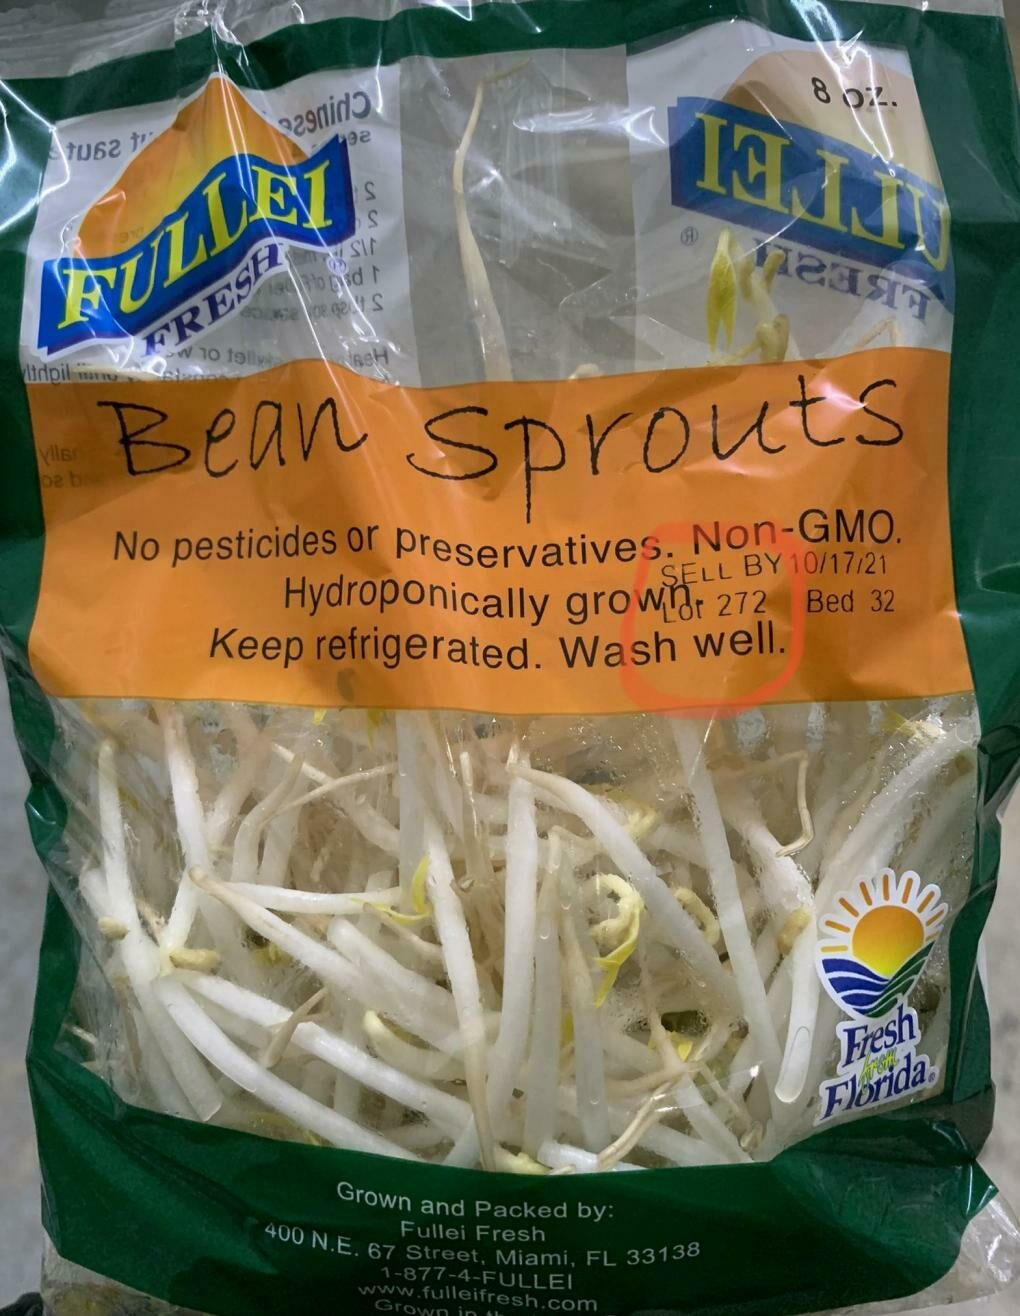 Fullei Fresh recalls bean and soy sprouts